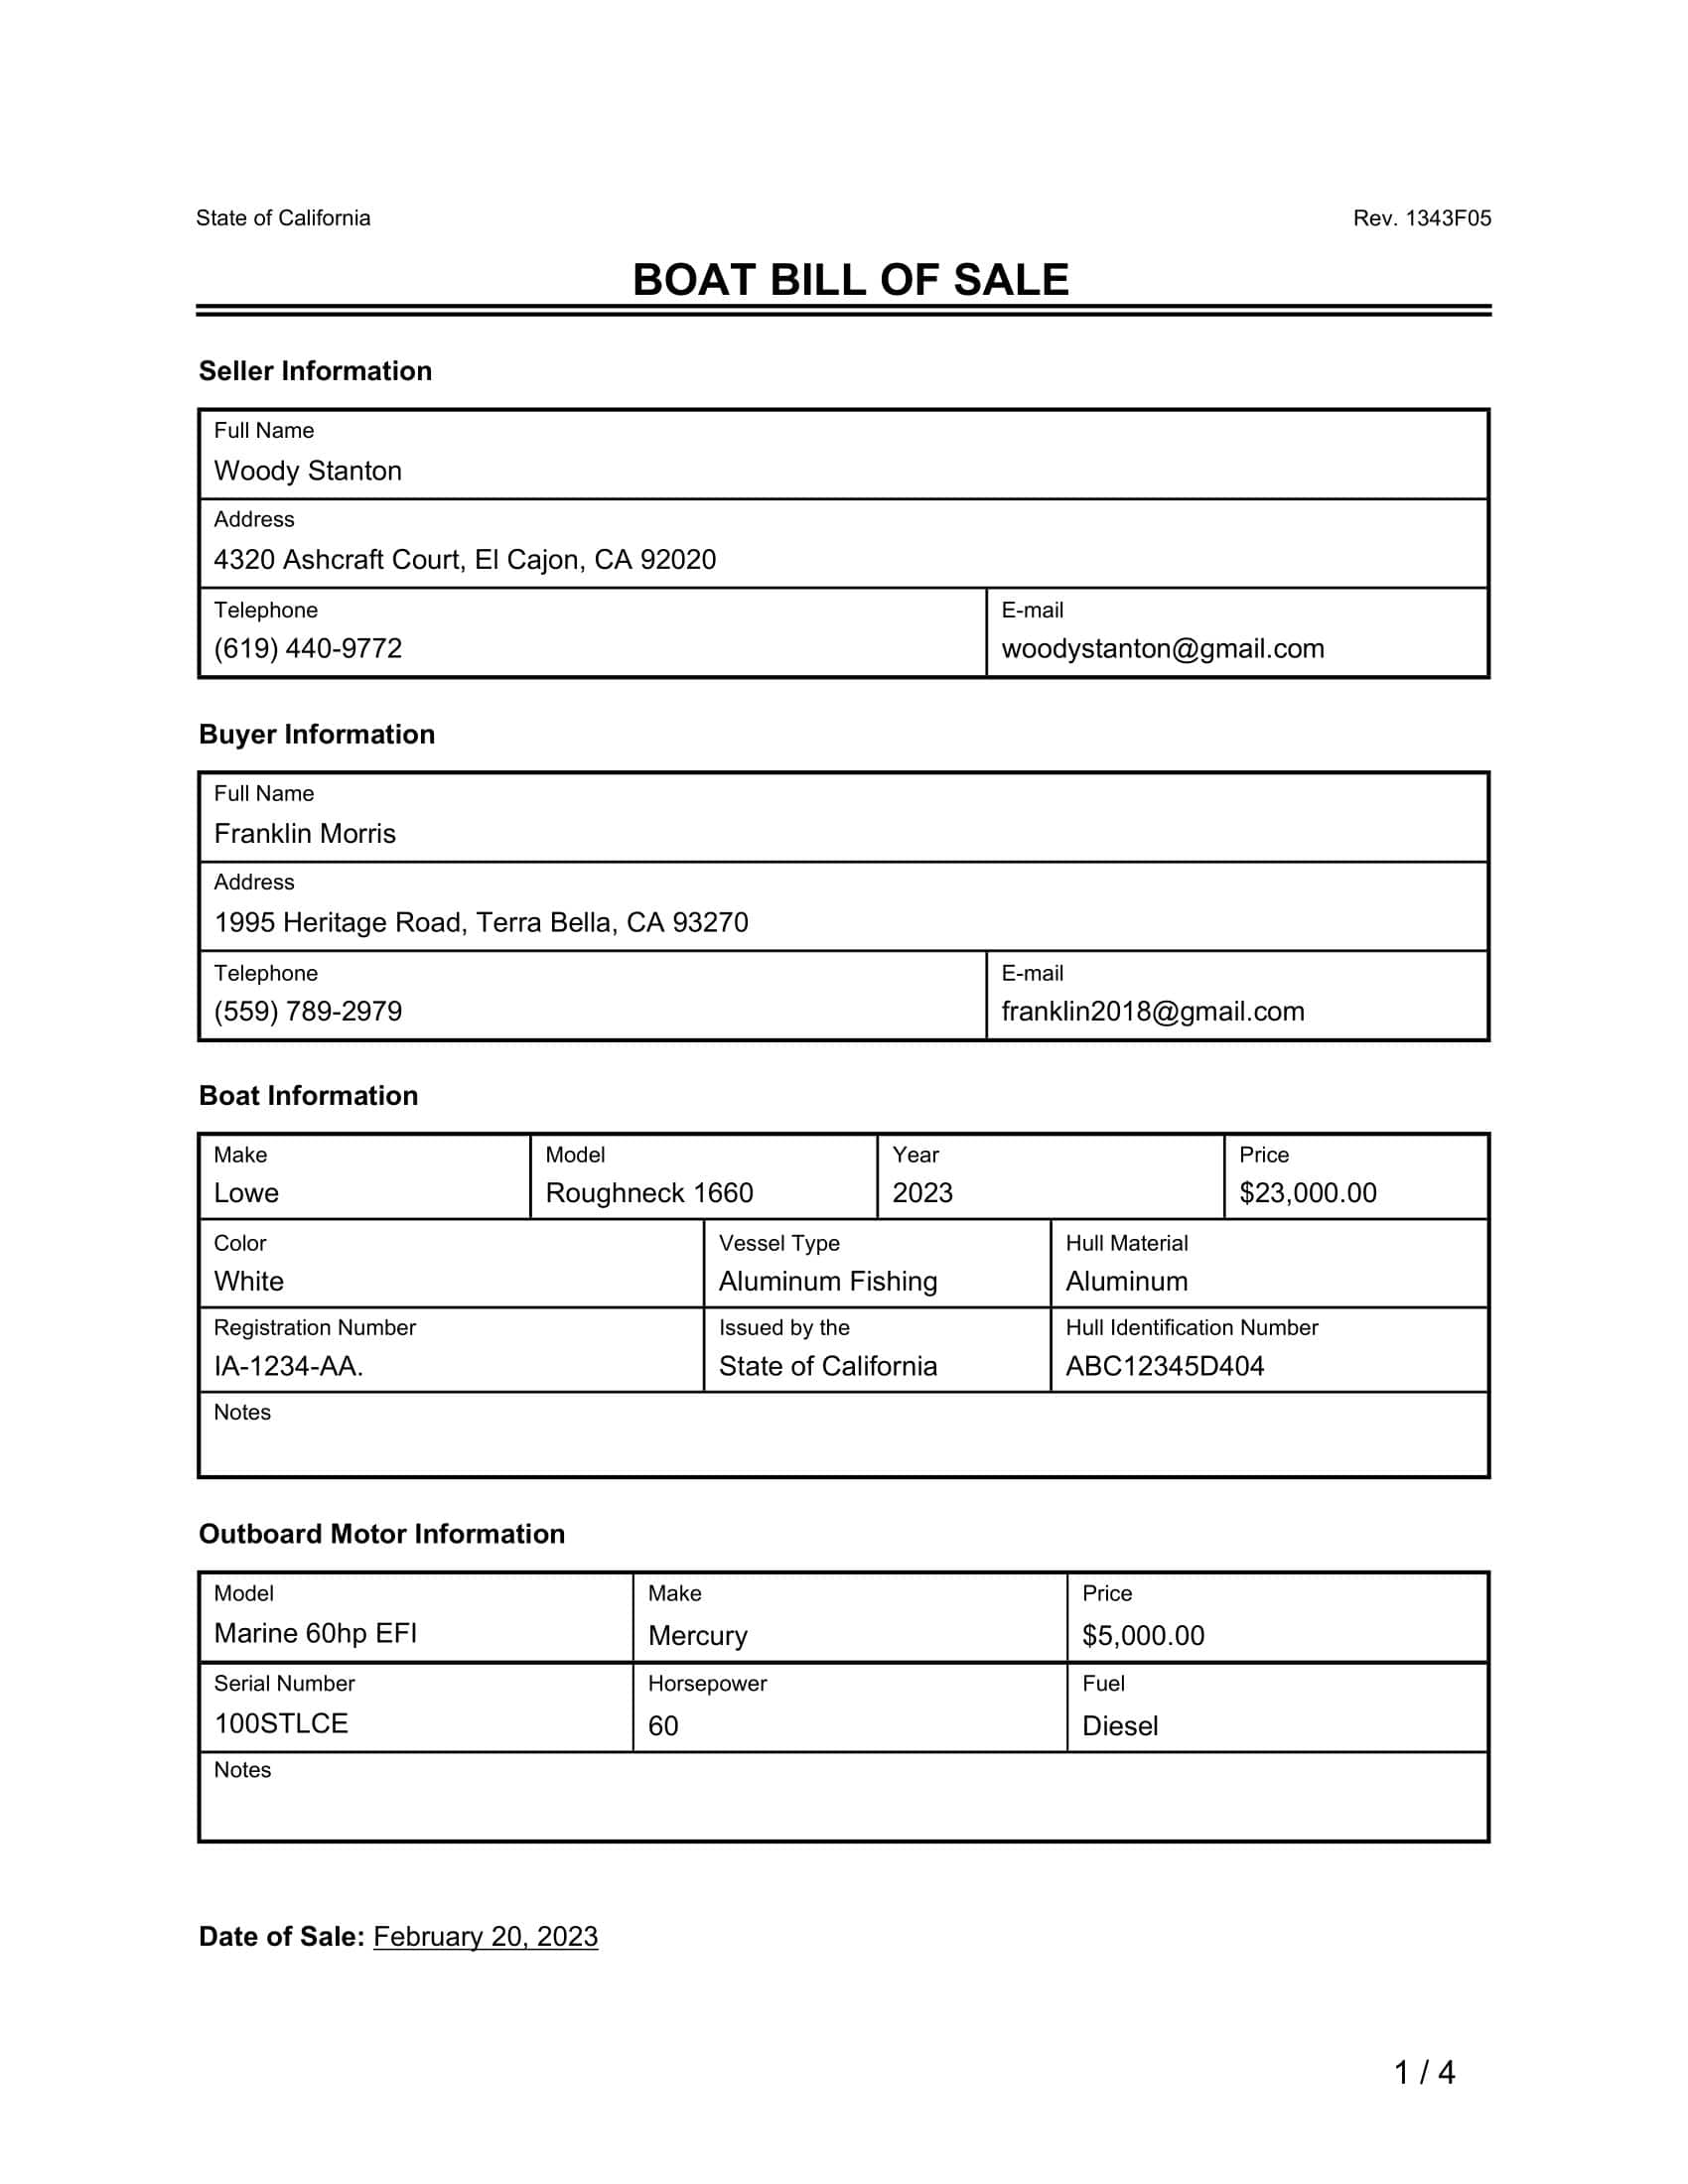 Boat bill of sale example